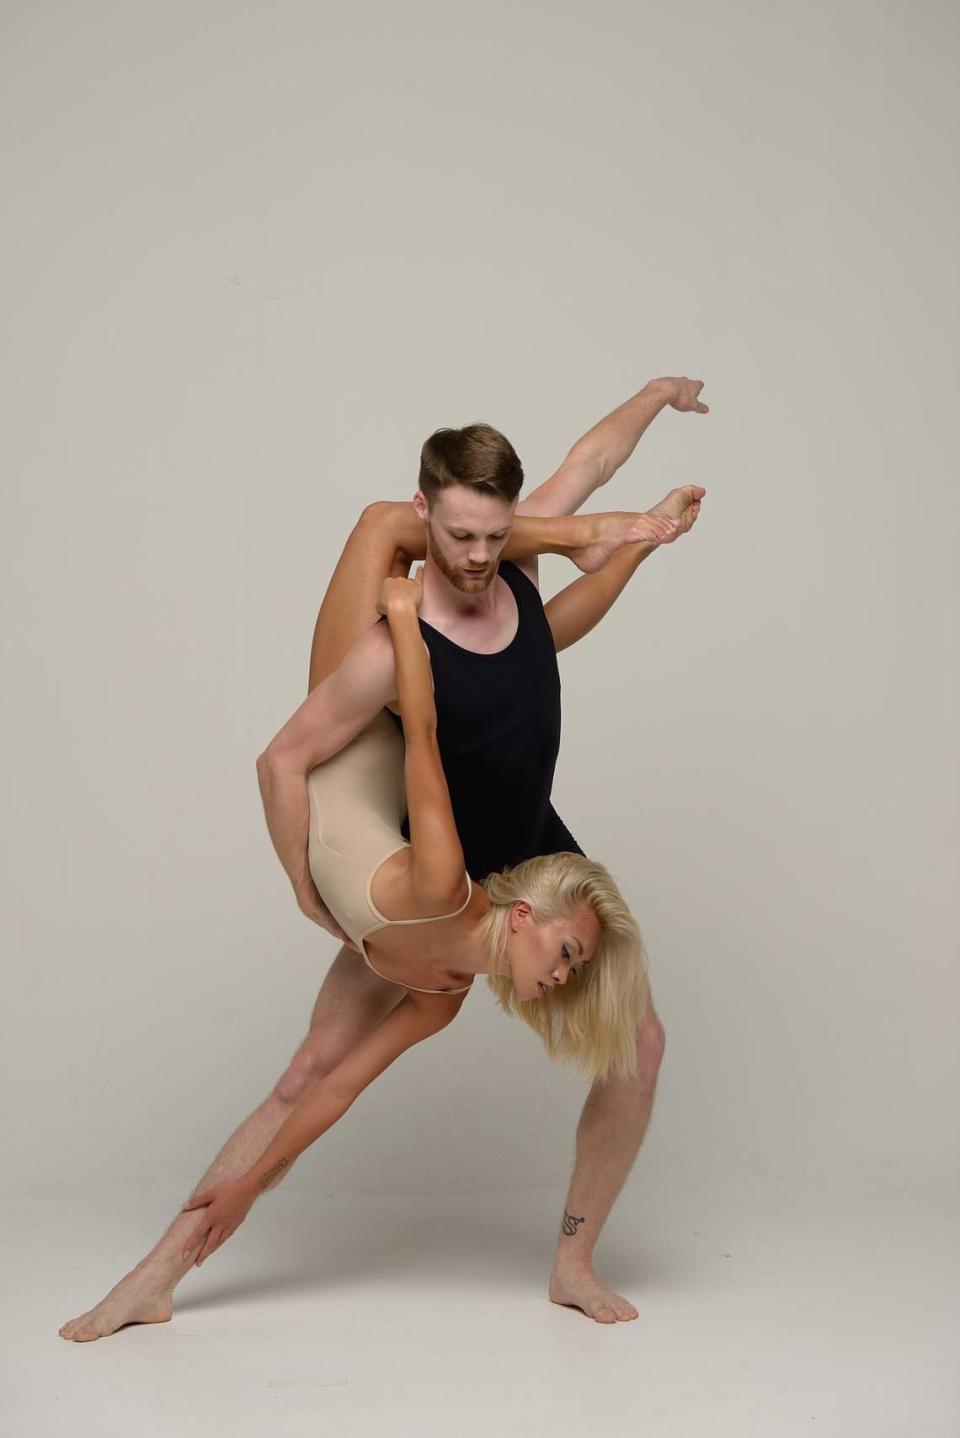 Isabelle Haas and Matthew Huefner of Dance NOW! Miami. The company will stage “this moment, here,” a one-act ballet performed live and streamed virtually, Sunday Dec. 13.